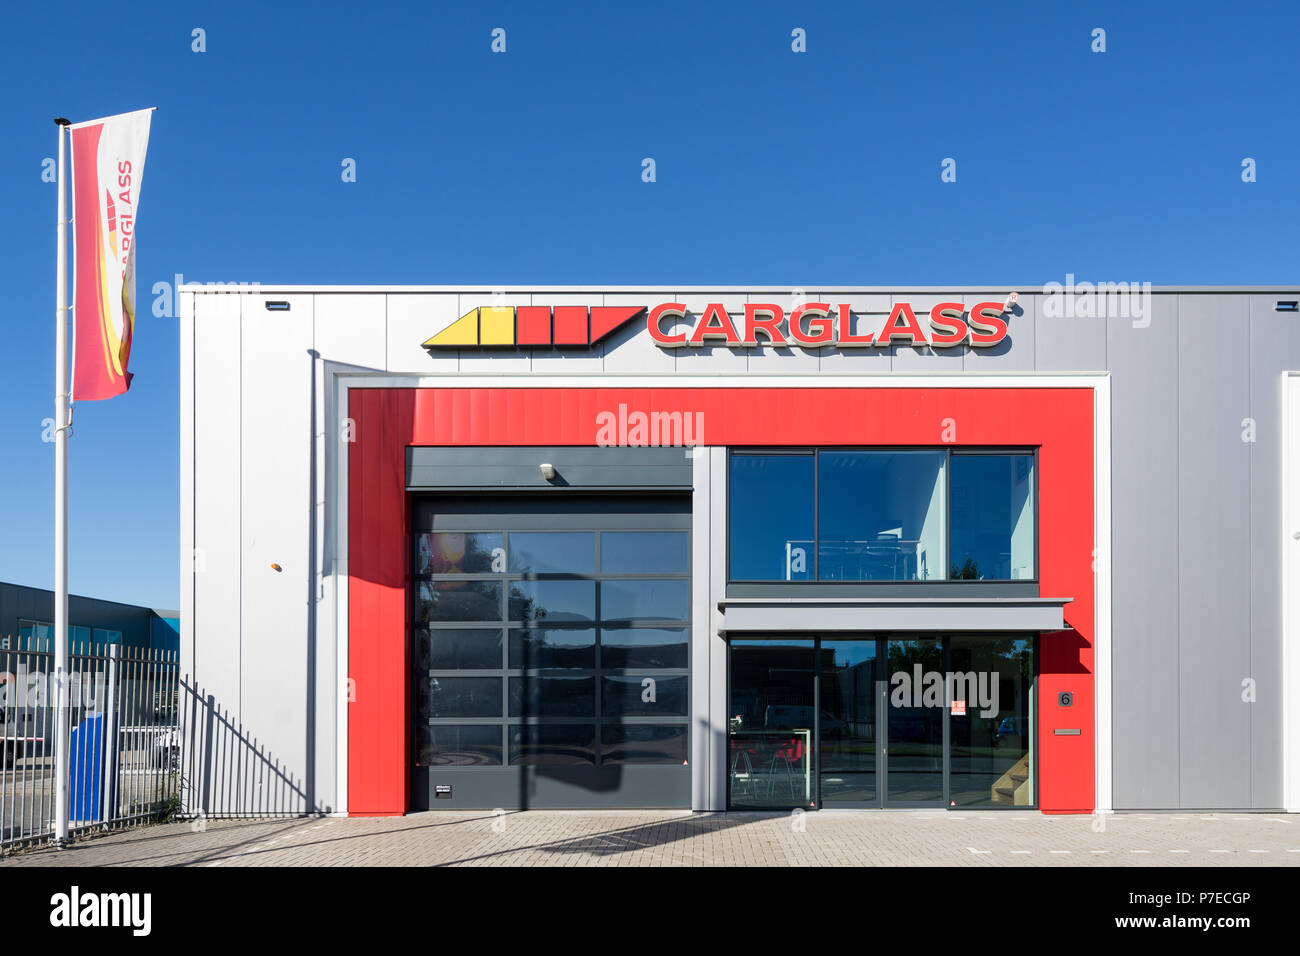 Carglass High Resolution Stock Photography and Images - Alamy